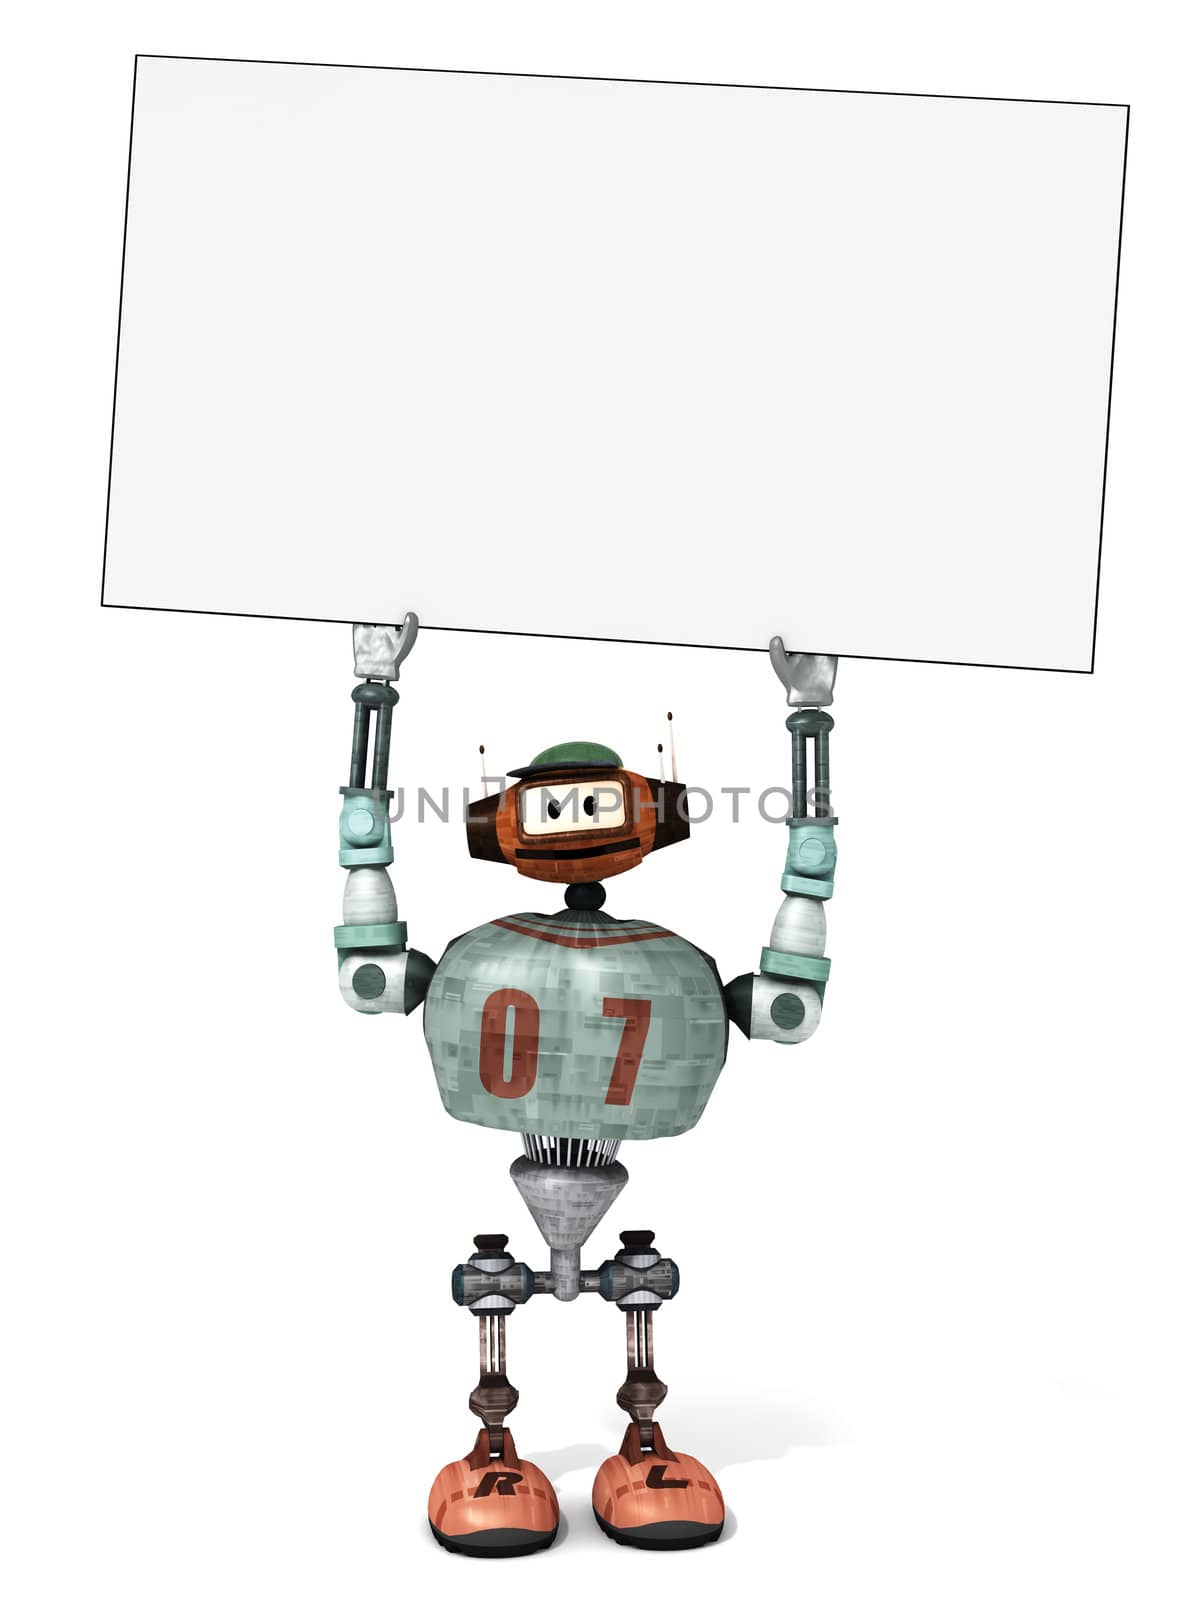 Djoby the robot holding an empty poster above its head by shkyo30